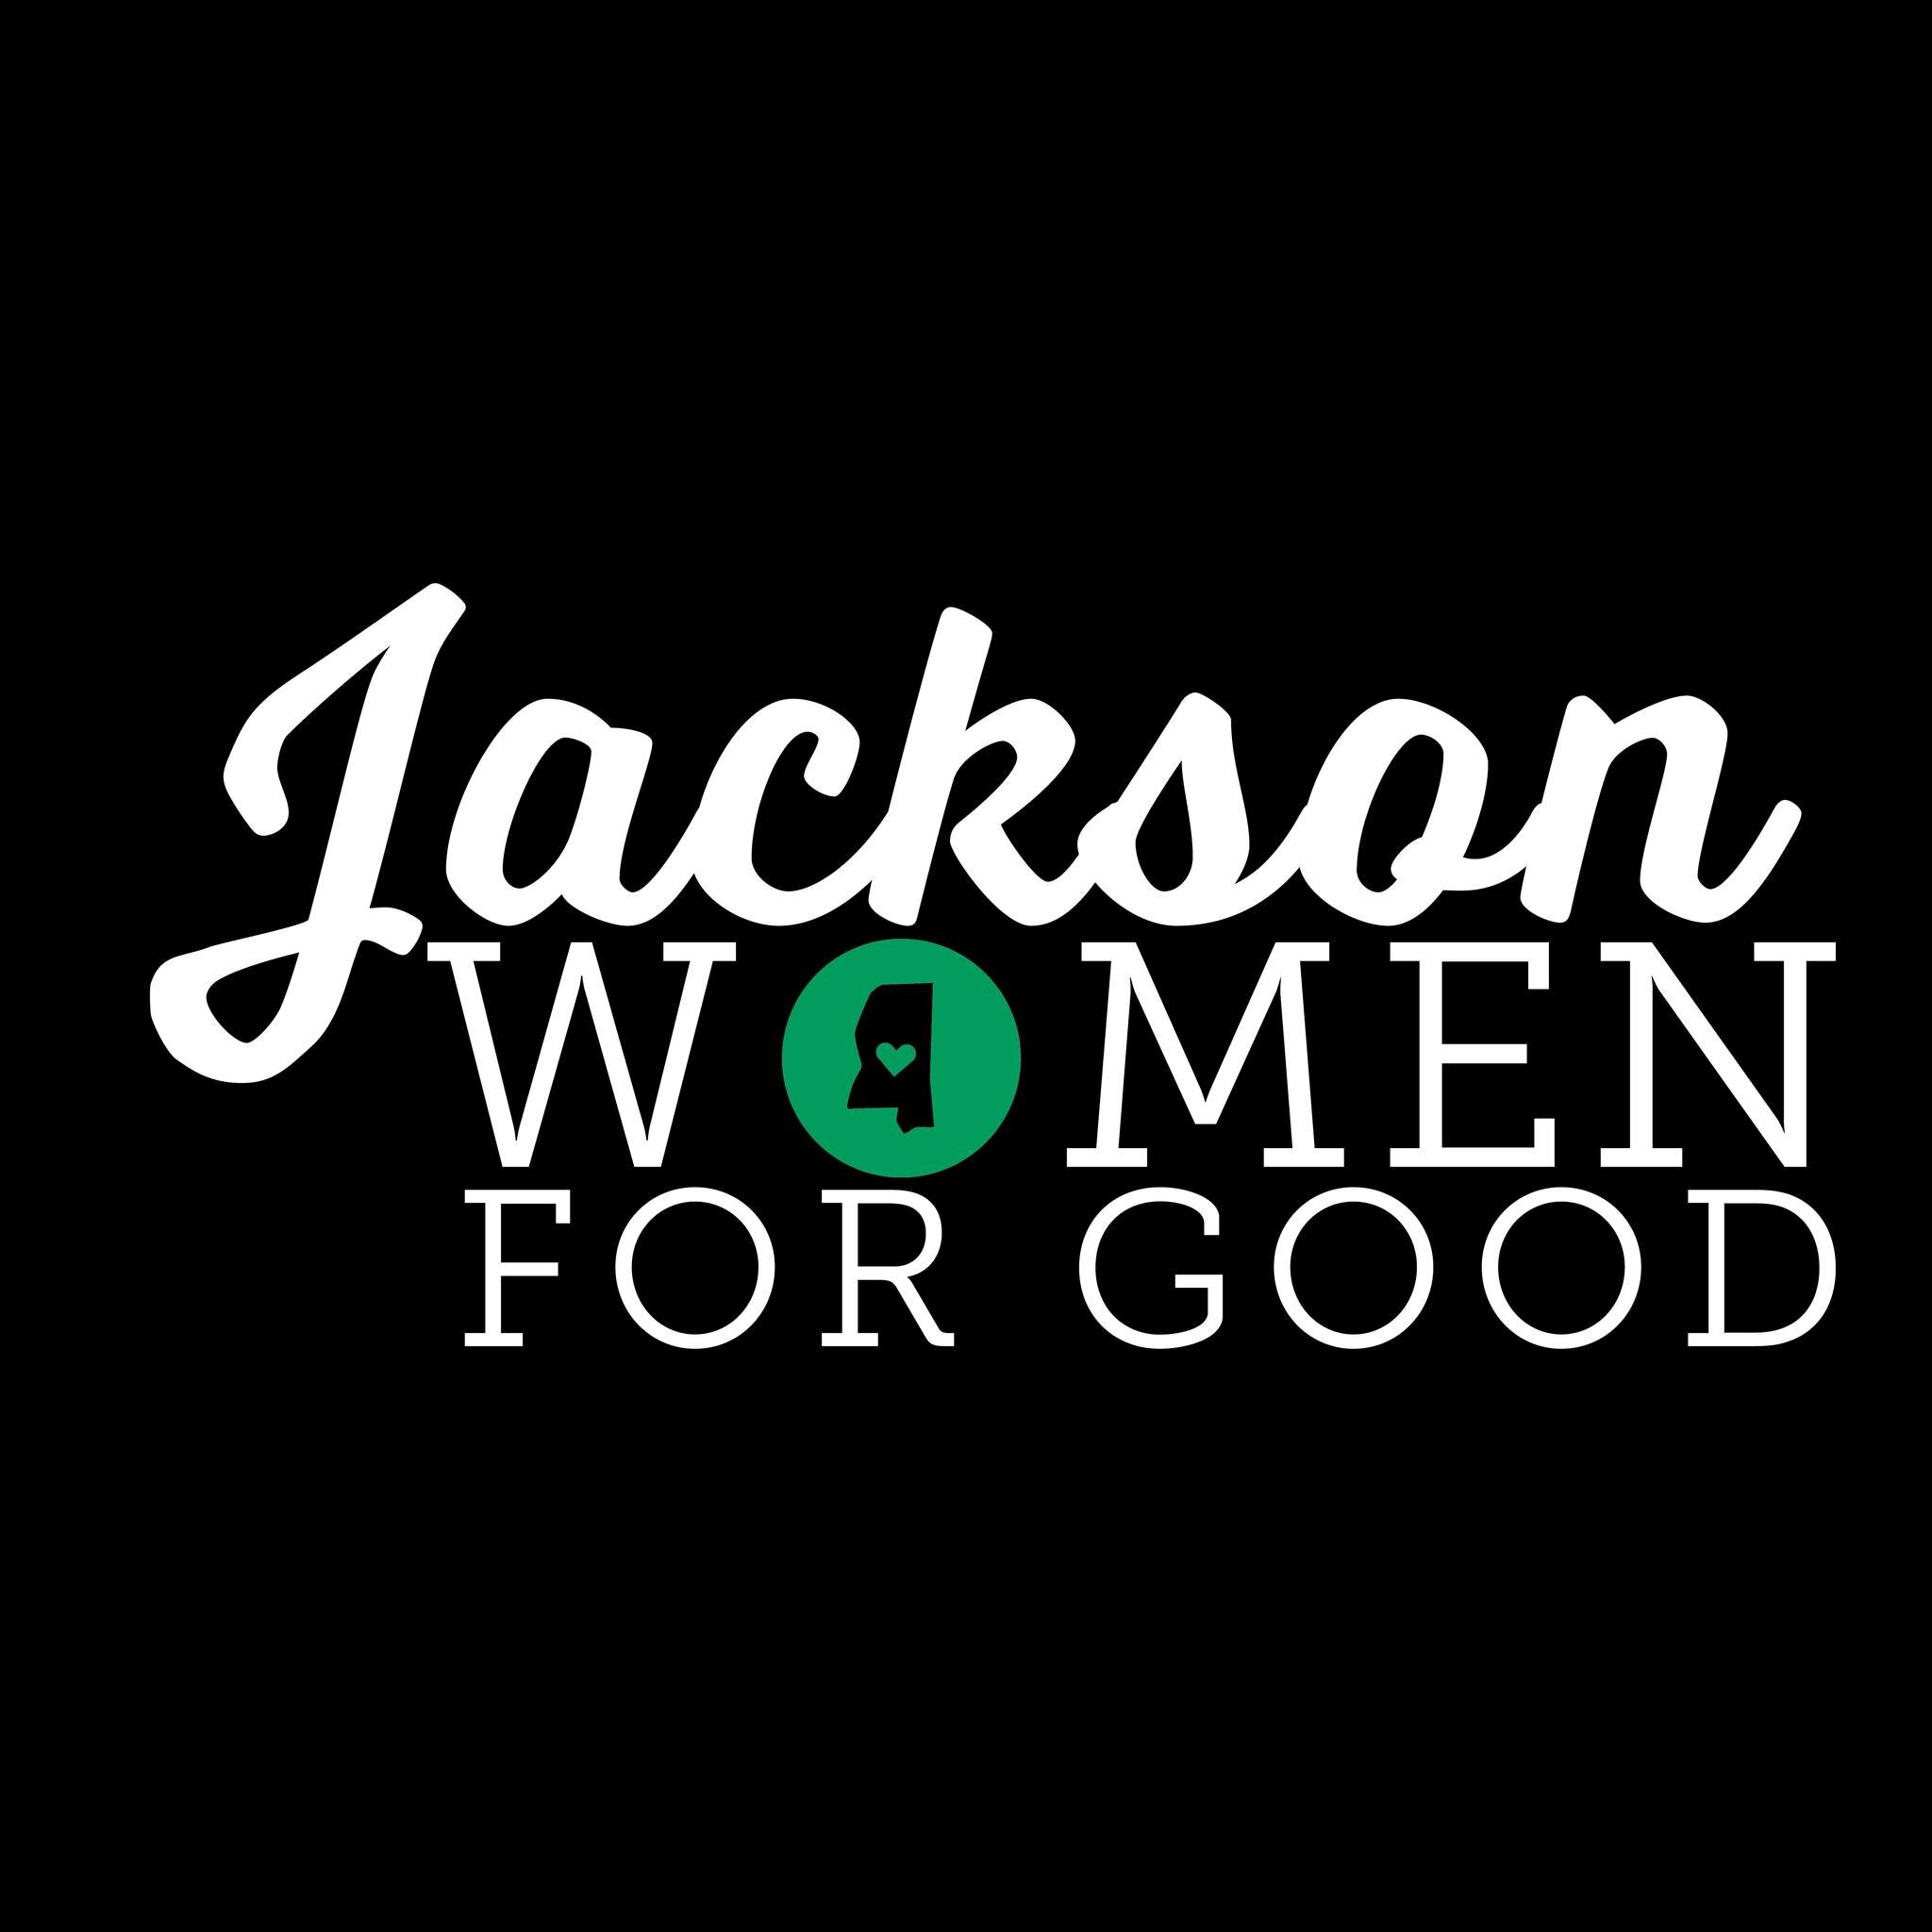 In April, I had the honor of co-designing the logo for Jackson Women for Good, an incredible group of women who are making a difference in our community. I'm so glad I got to do this project and that I get to be a member of this group. 

#graphicdesi